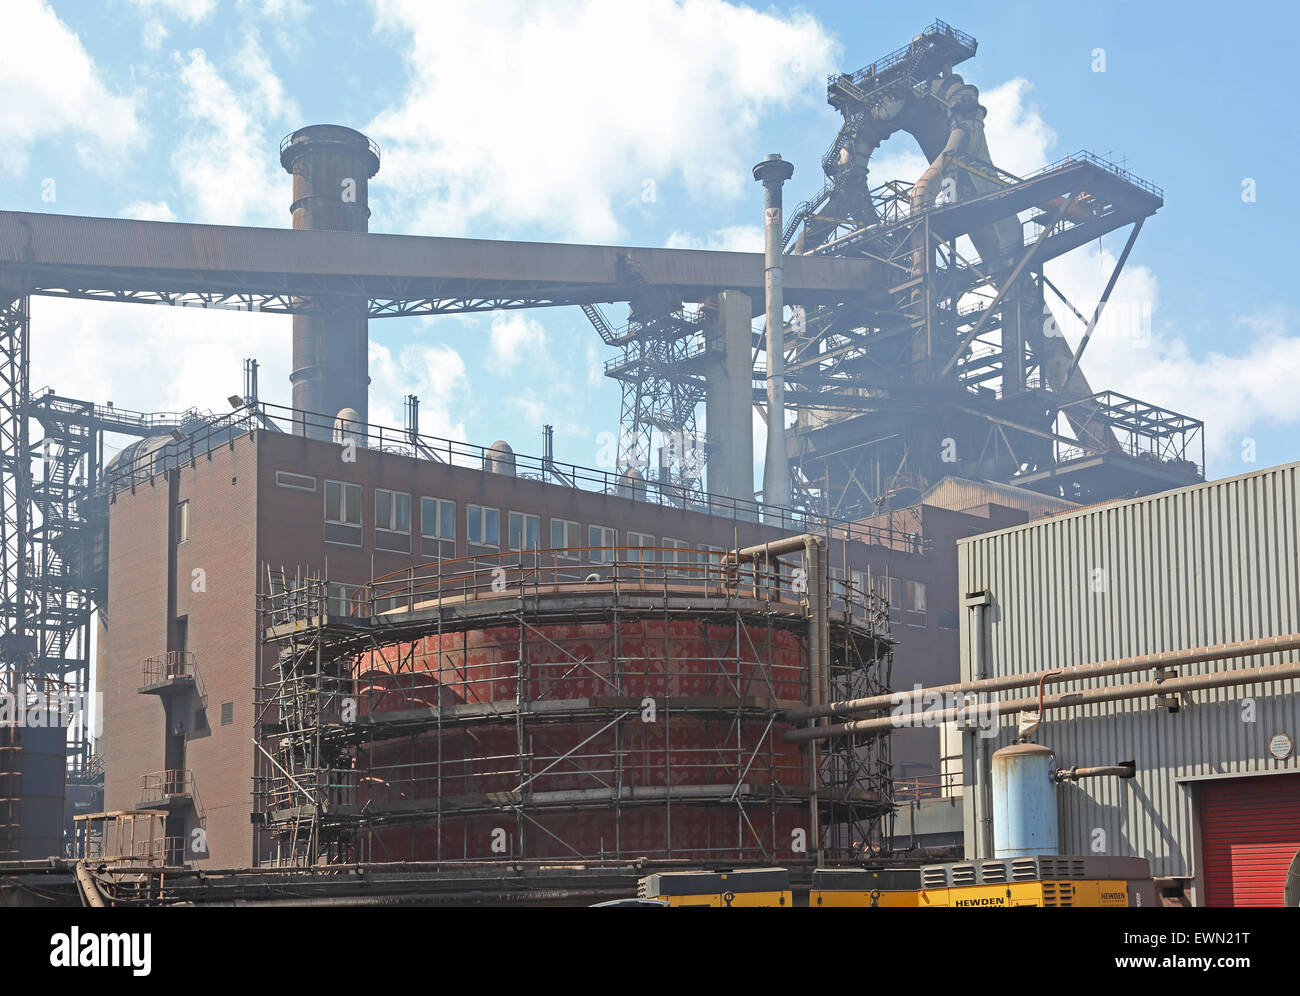 The Blast Furnace structure overshadows offices at Redcar Steel works. Scaffolding surrounds a tank in the foreground Stock Photo